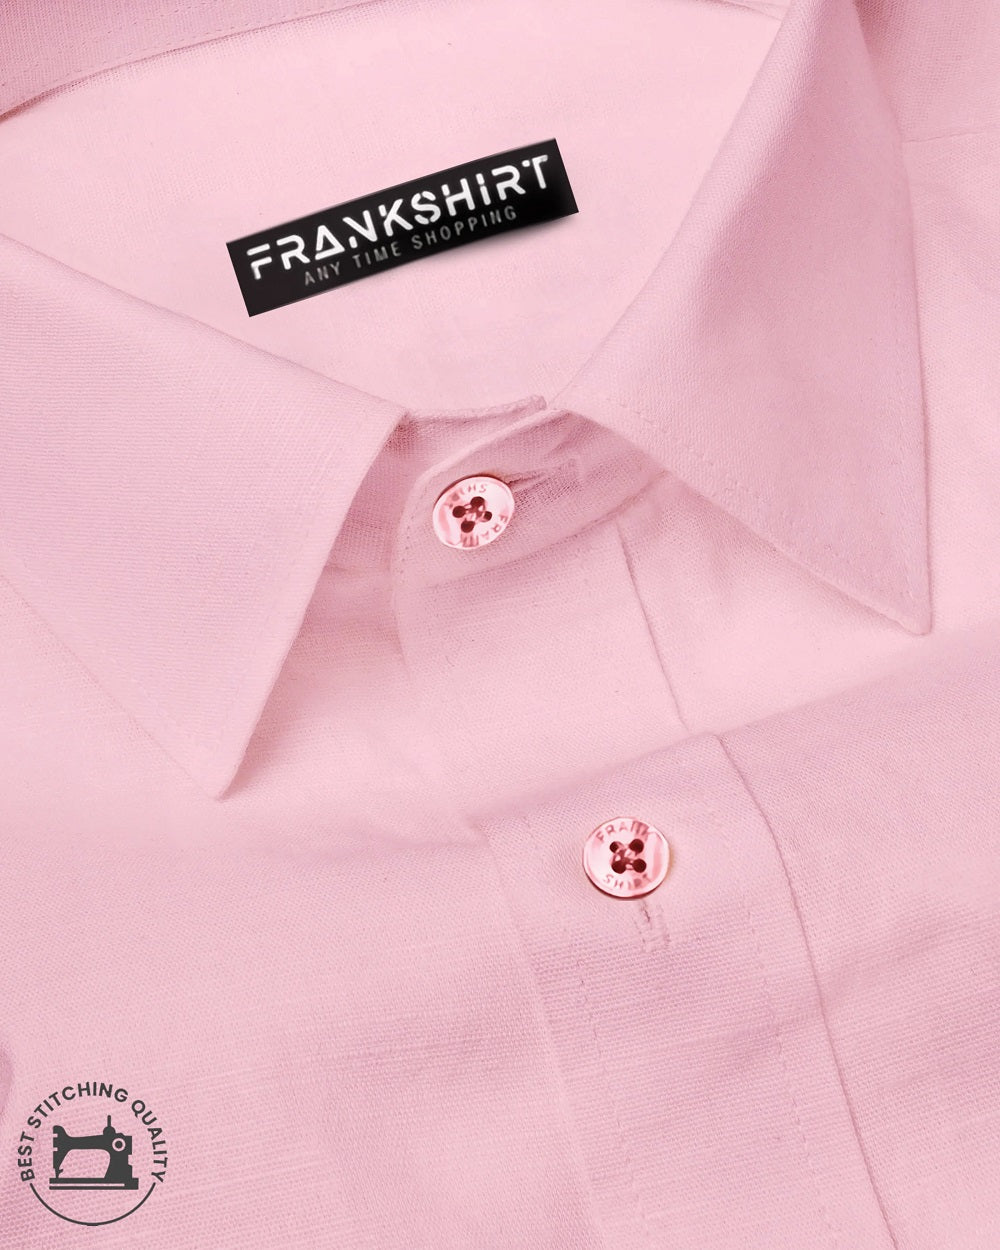 Pack of 2 Cotton Shirt for Man (Light Pink with Black White)